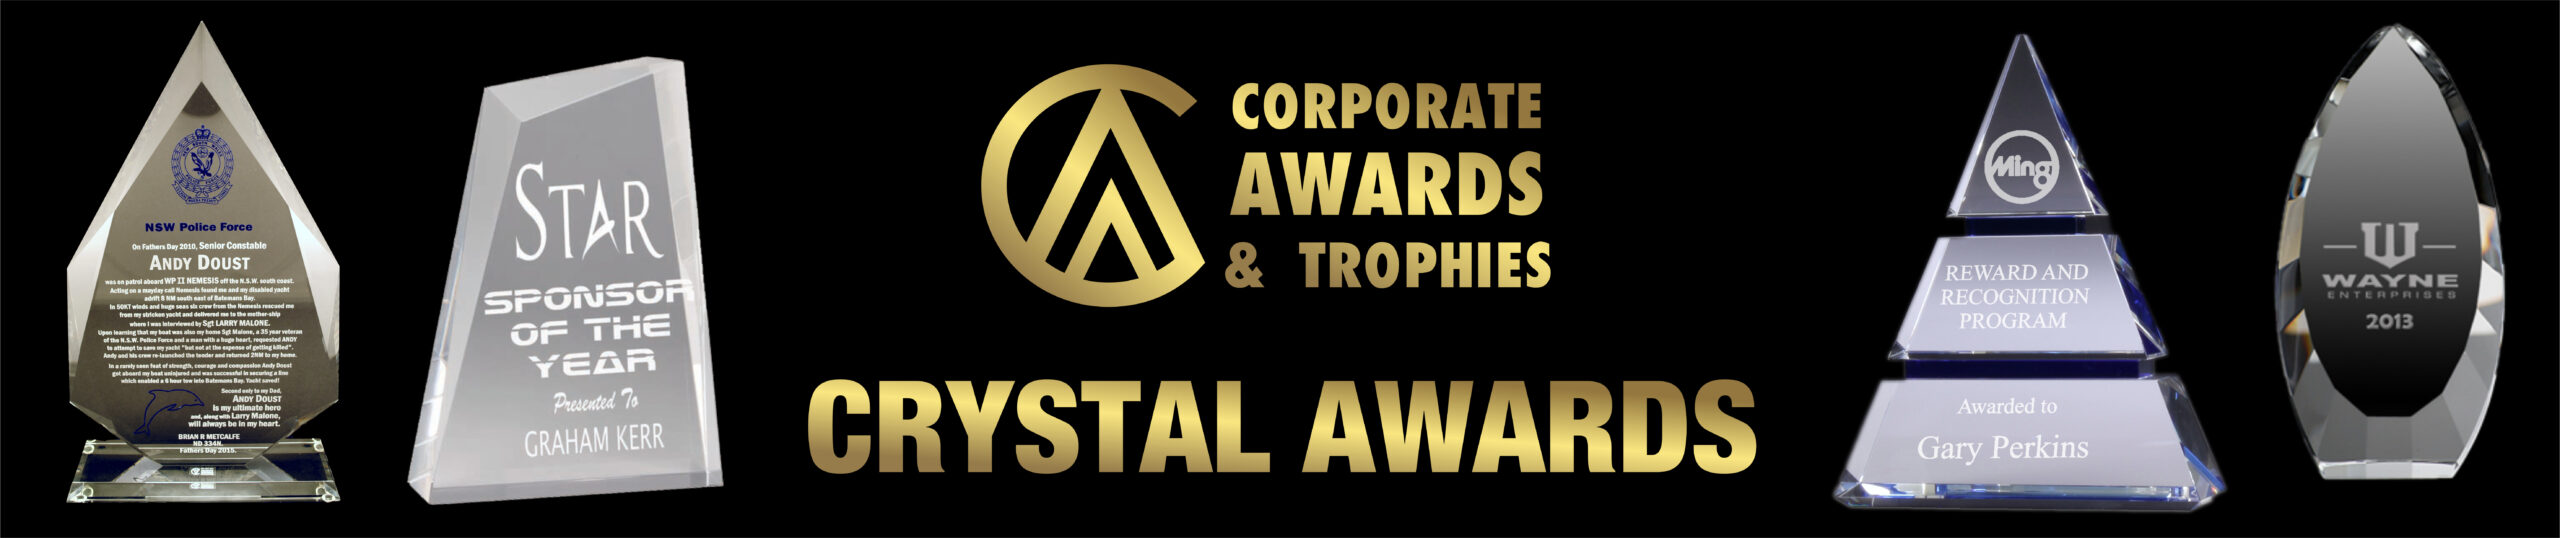 Crystal Awards & Trophies